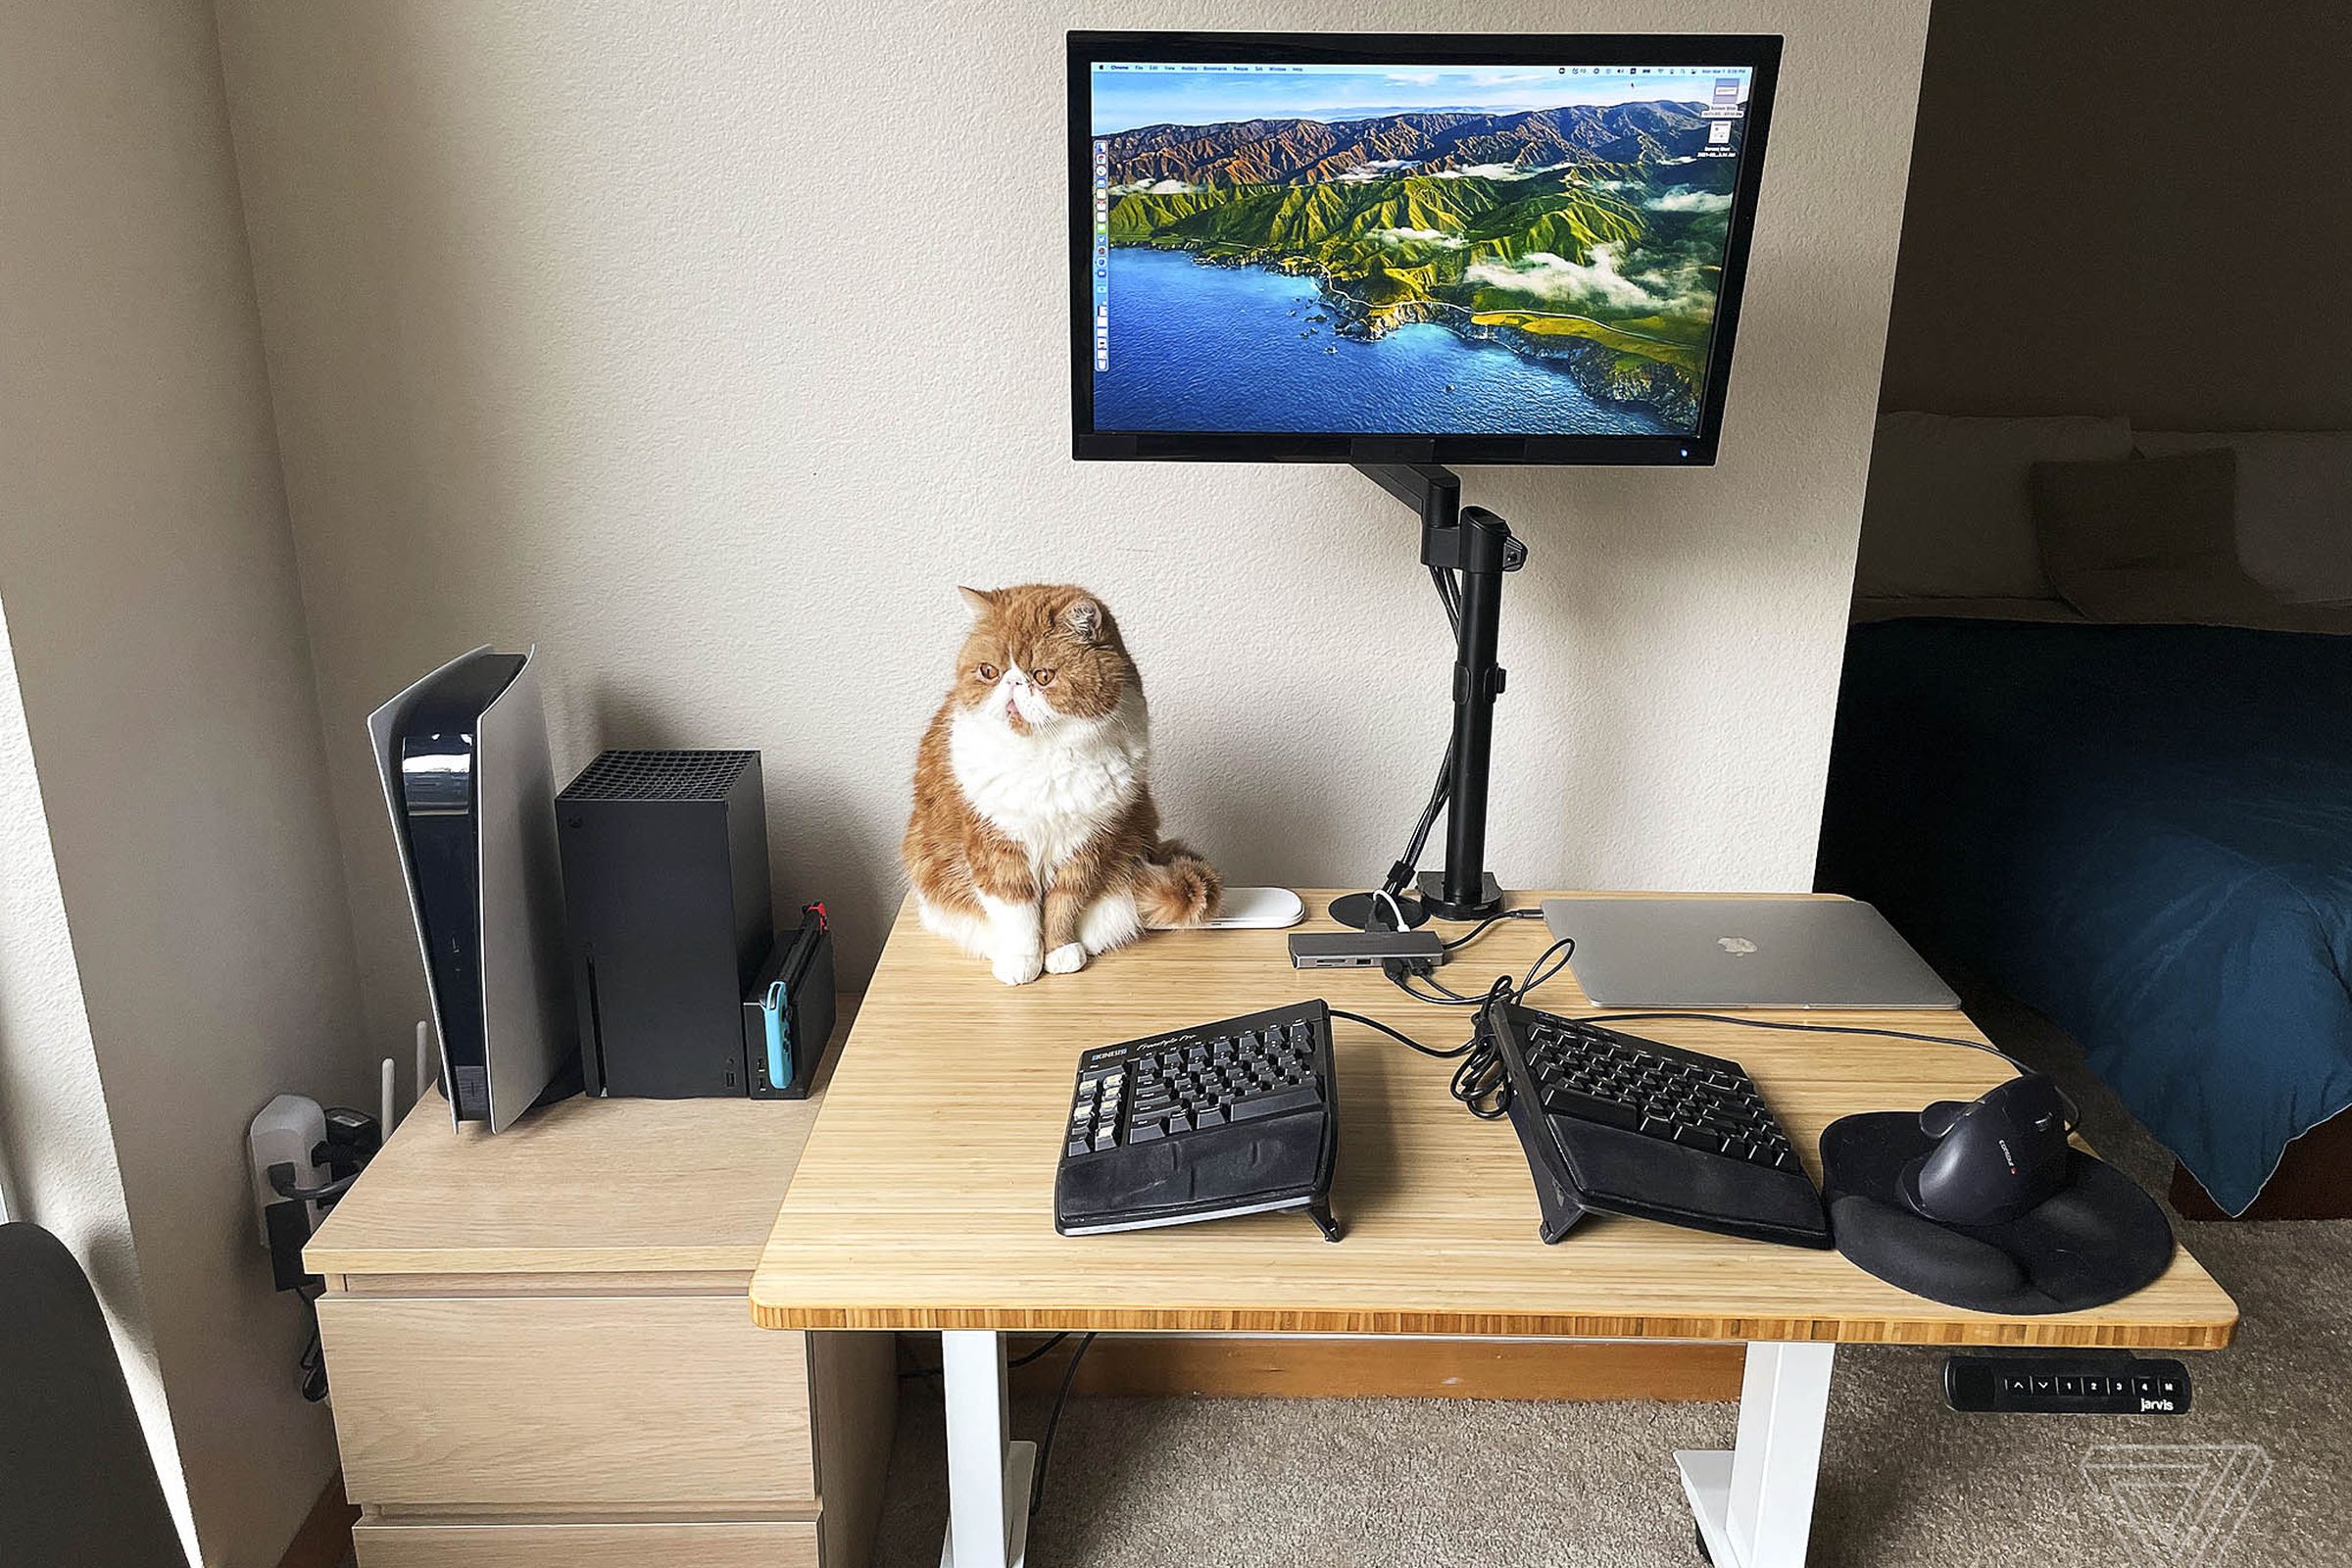 Cat sitting on desk next to monitor, keyboard, and other devices.